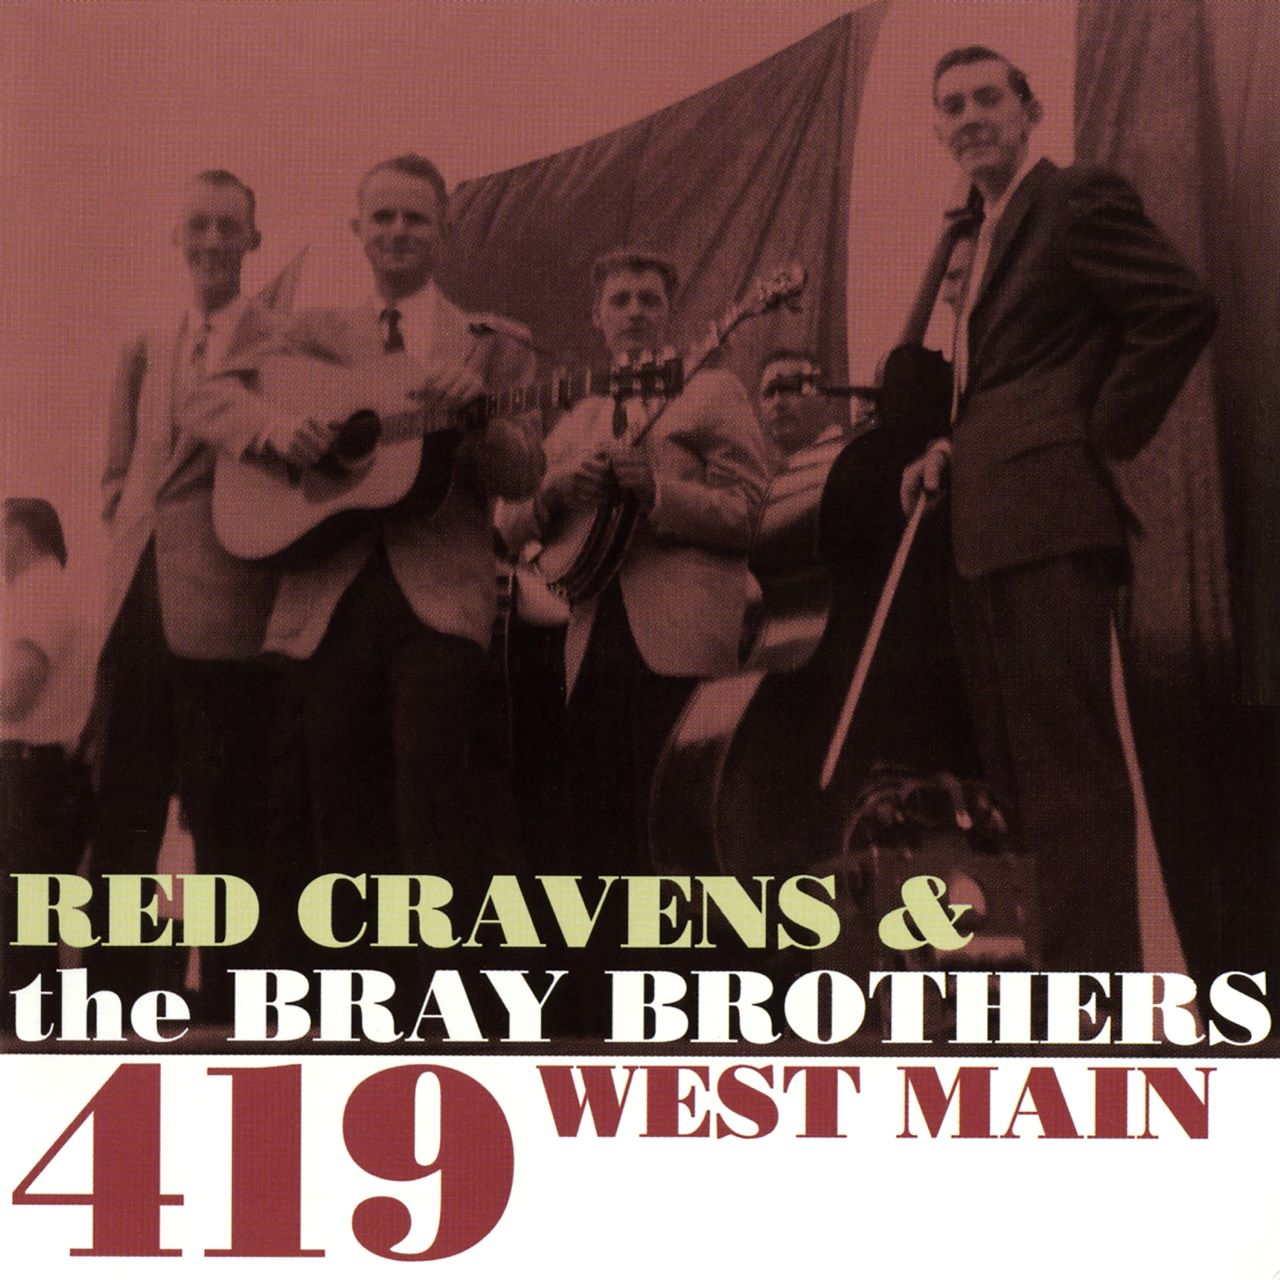 Red Cravens & The Bray Brothers - 419 West Main cover album